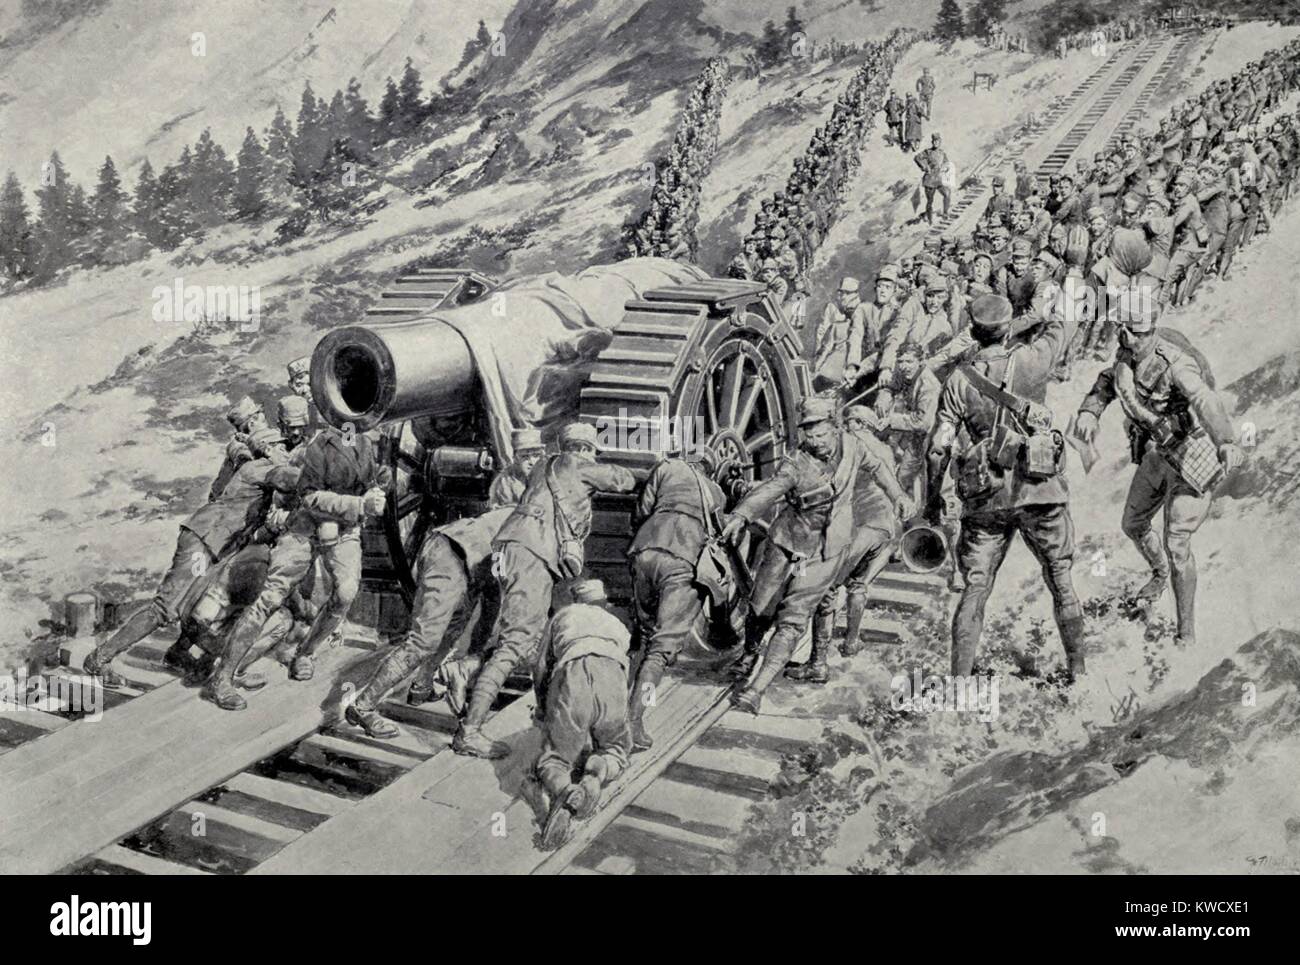 World War 1 in the Italian and Austria Alps. Italian soldiers hauling a monster gun up the Alpine slope in the winter campaign 1915-16. (BSLOC_2013_1_31) Stock Photo